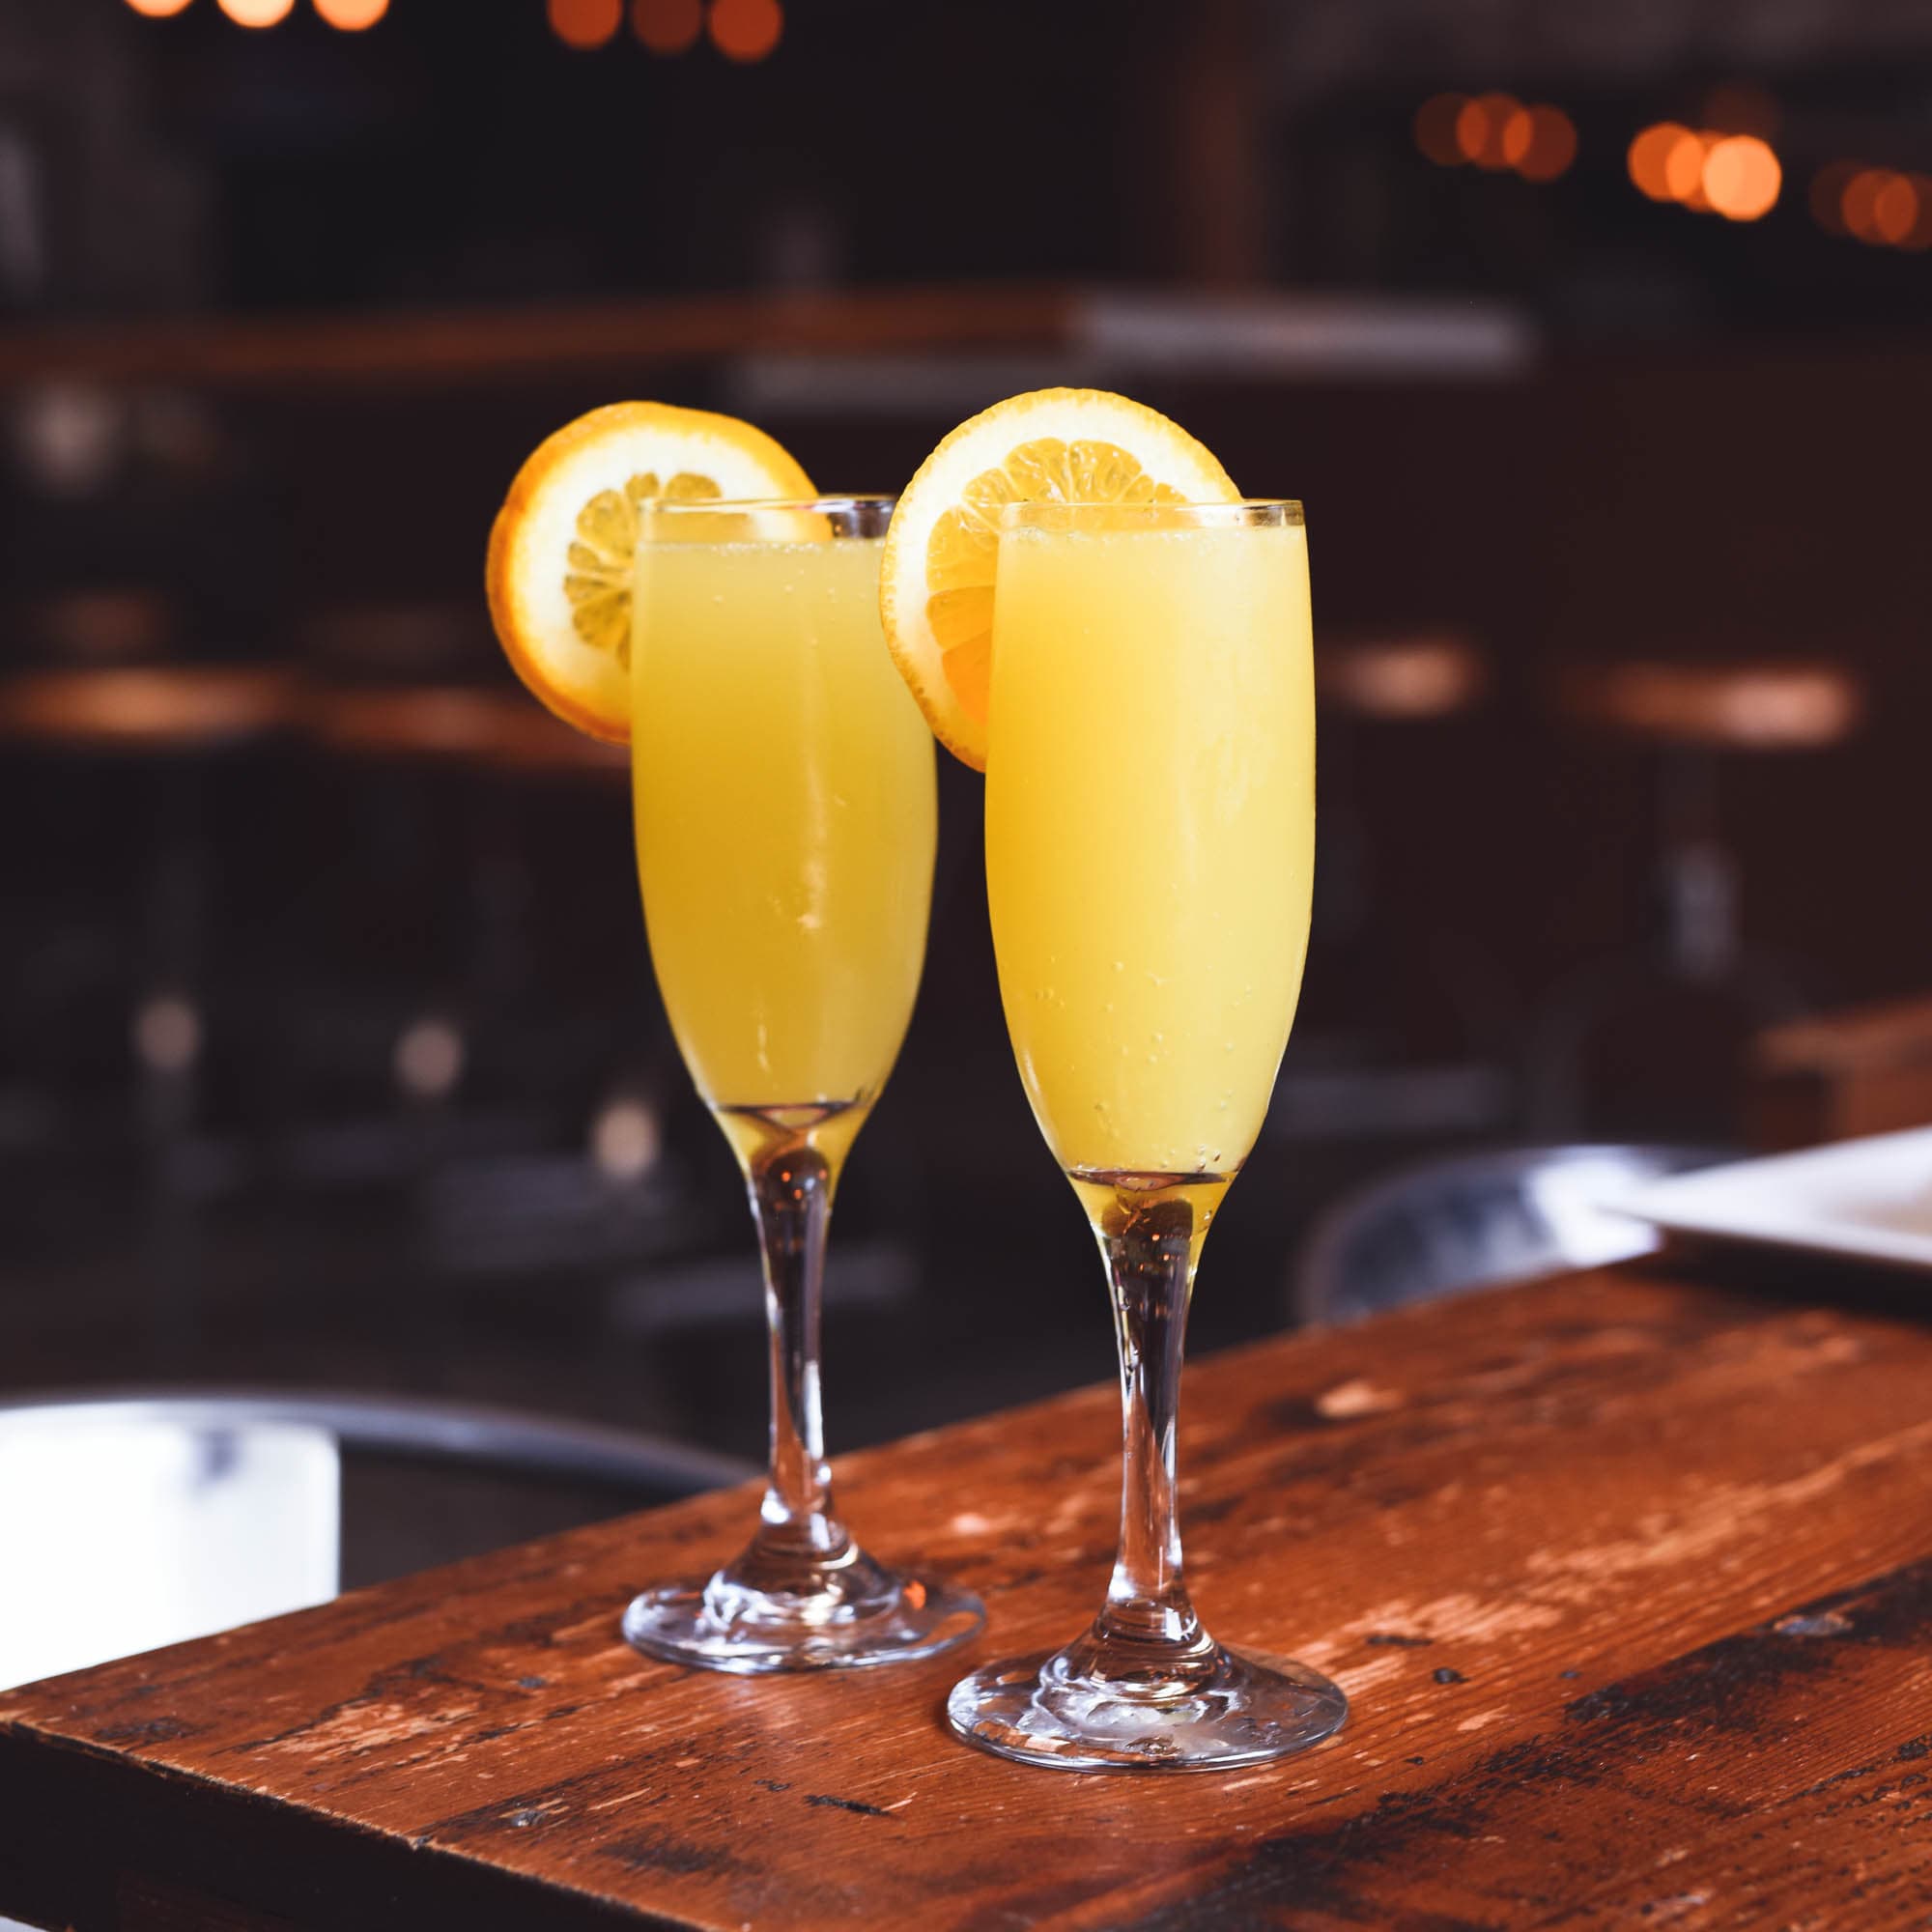 two prosecco mimosa cocktails with orange slice garnish on wood table